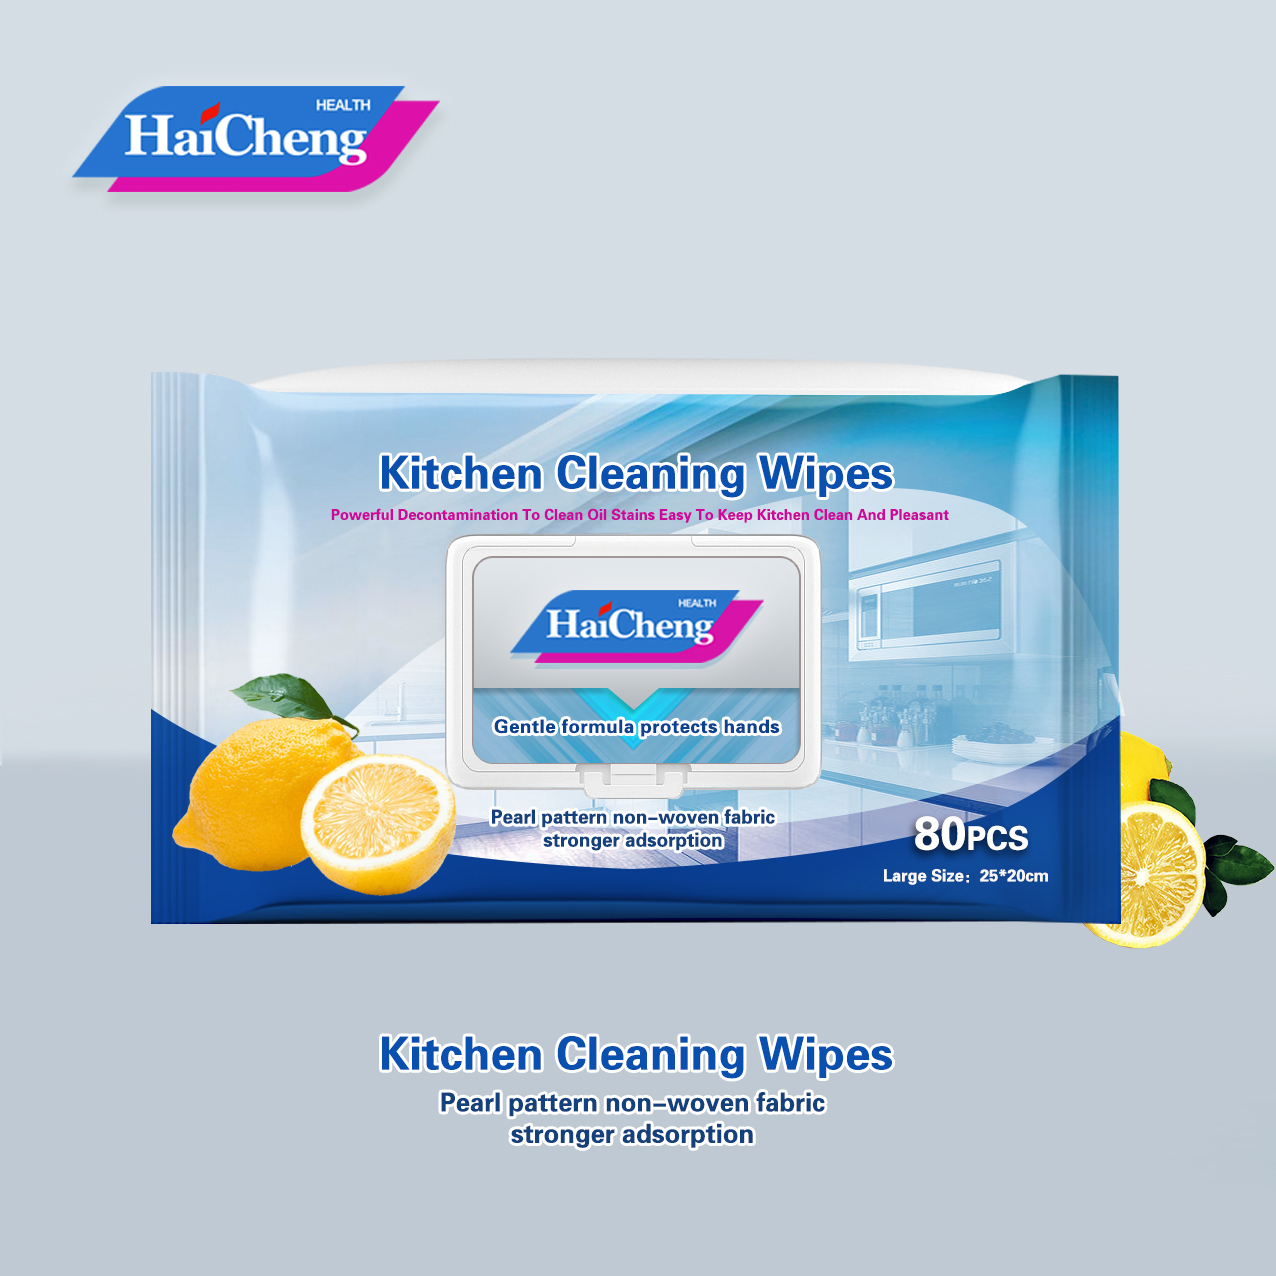 Kitchen Cleaning Wipes Featured Image